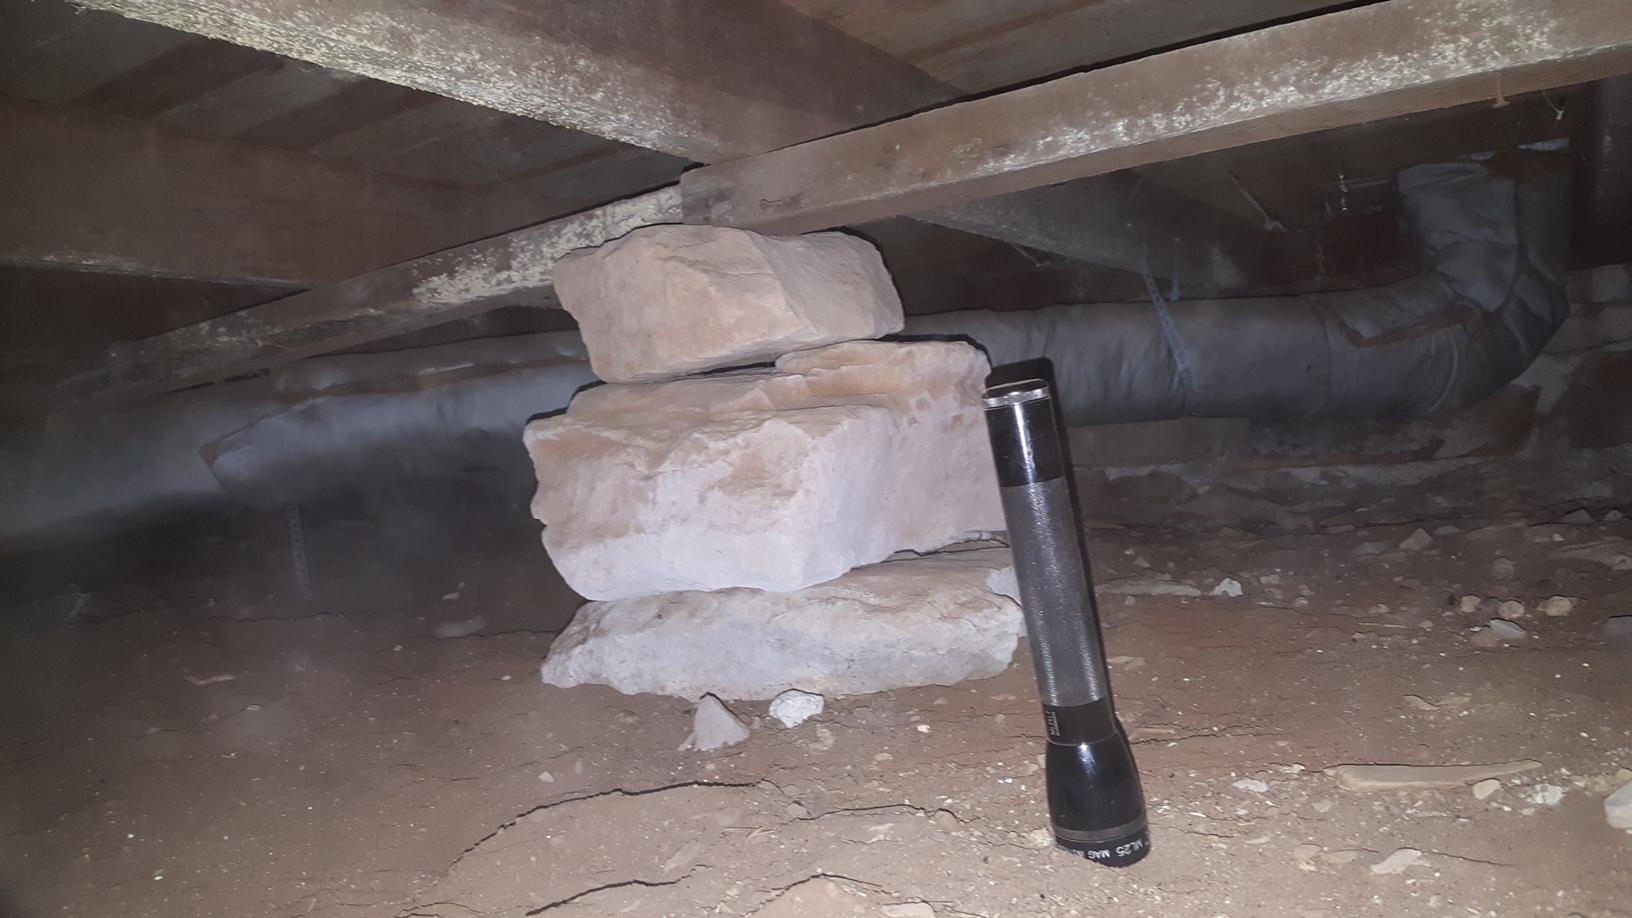 The flashlight in this picture shows the height of the crawl space nearly being about 16 inches. Even with tight locations a Smart Jack system can be easily installed.